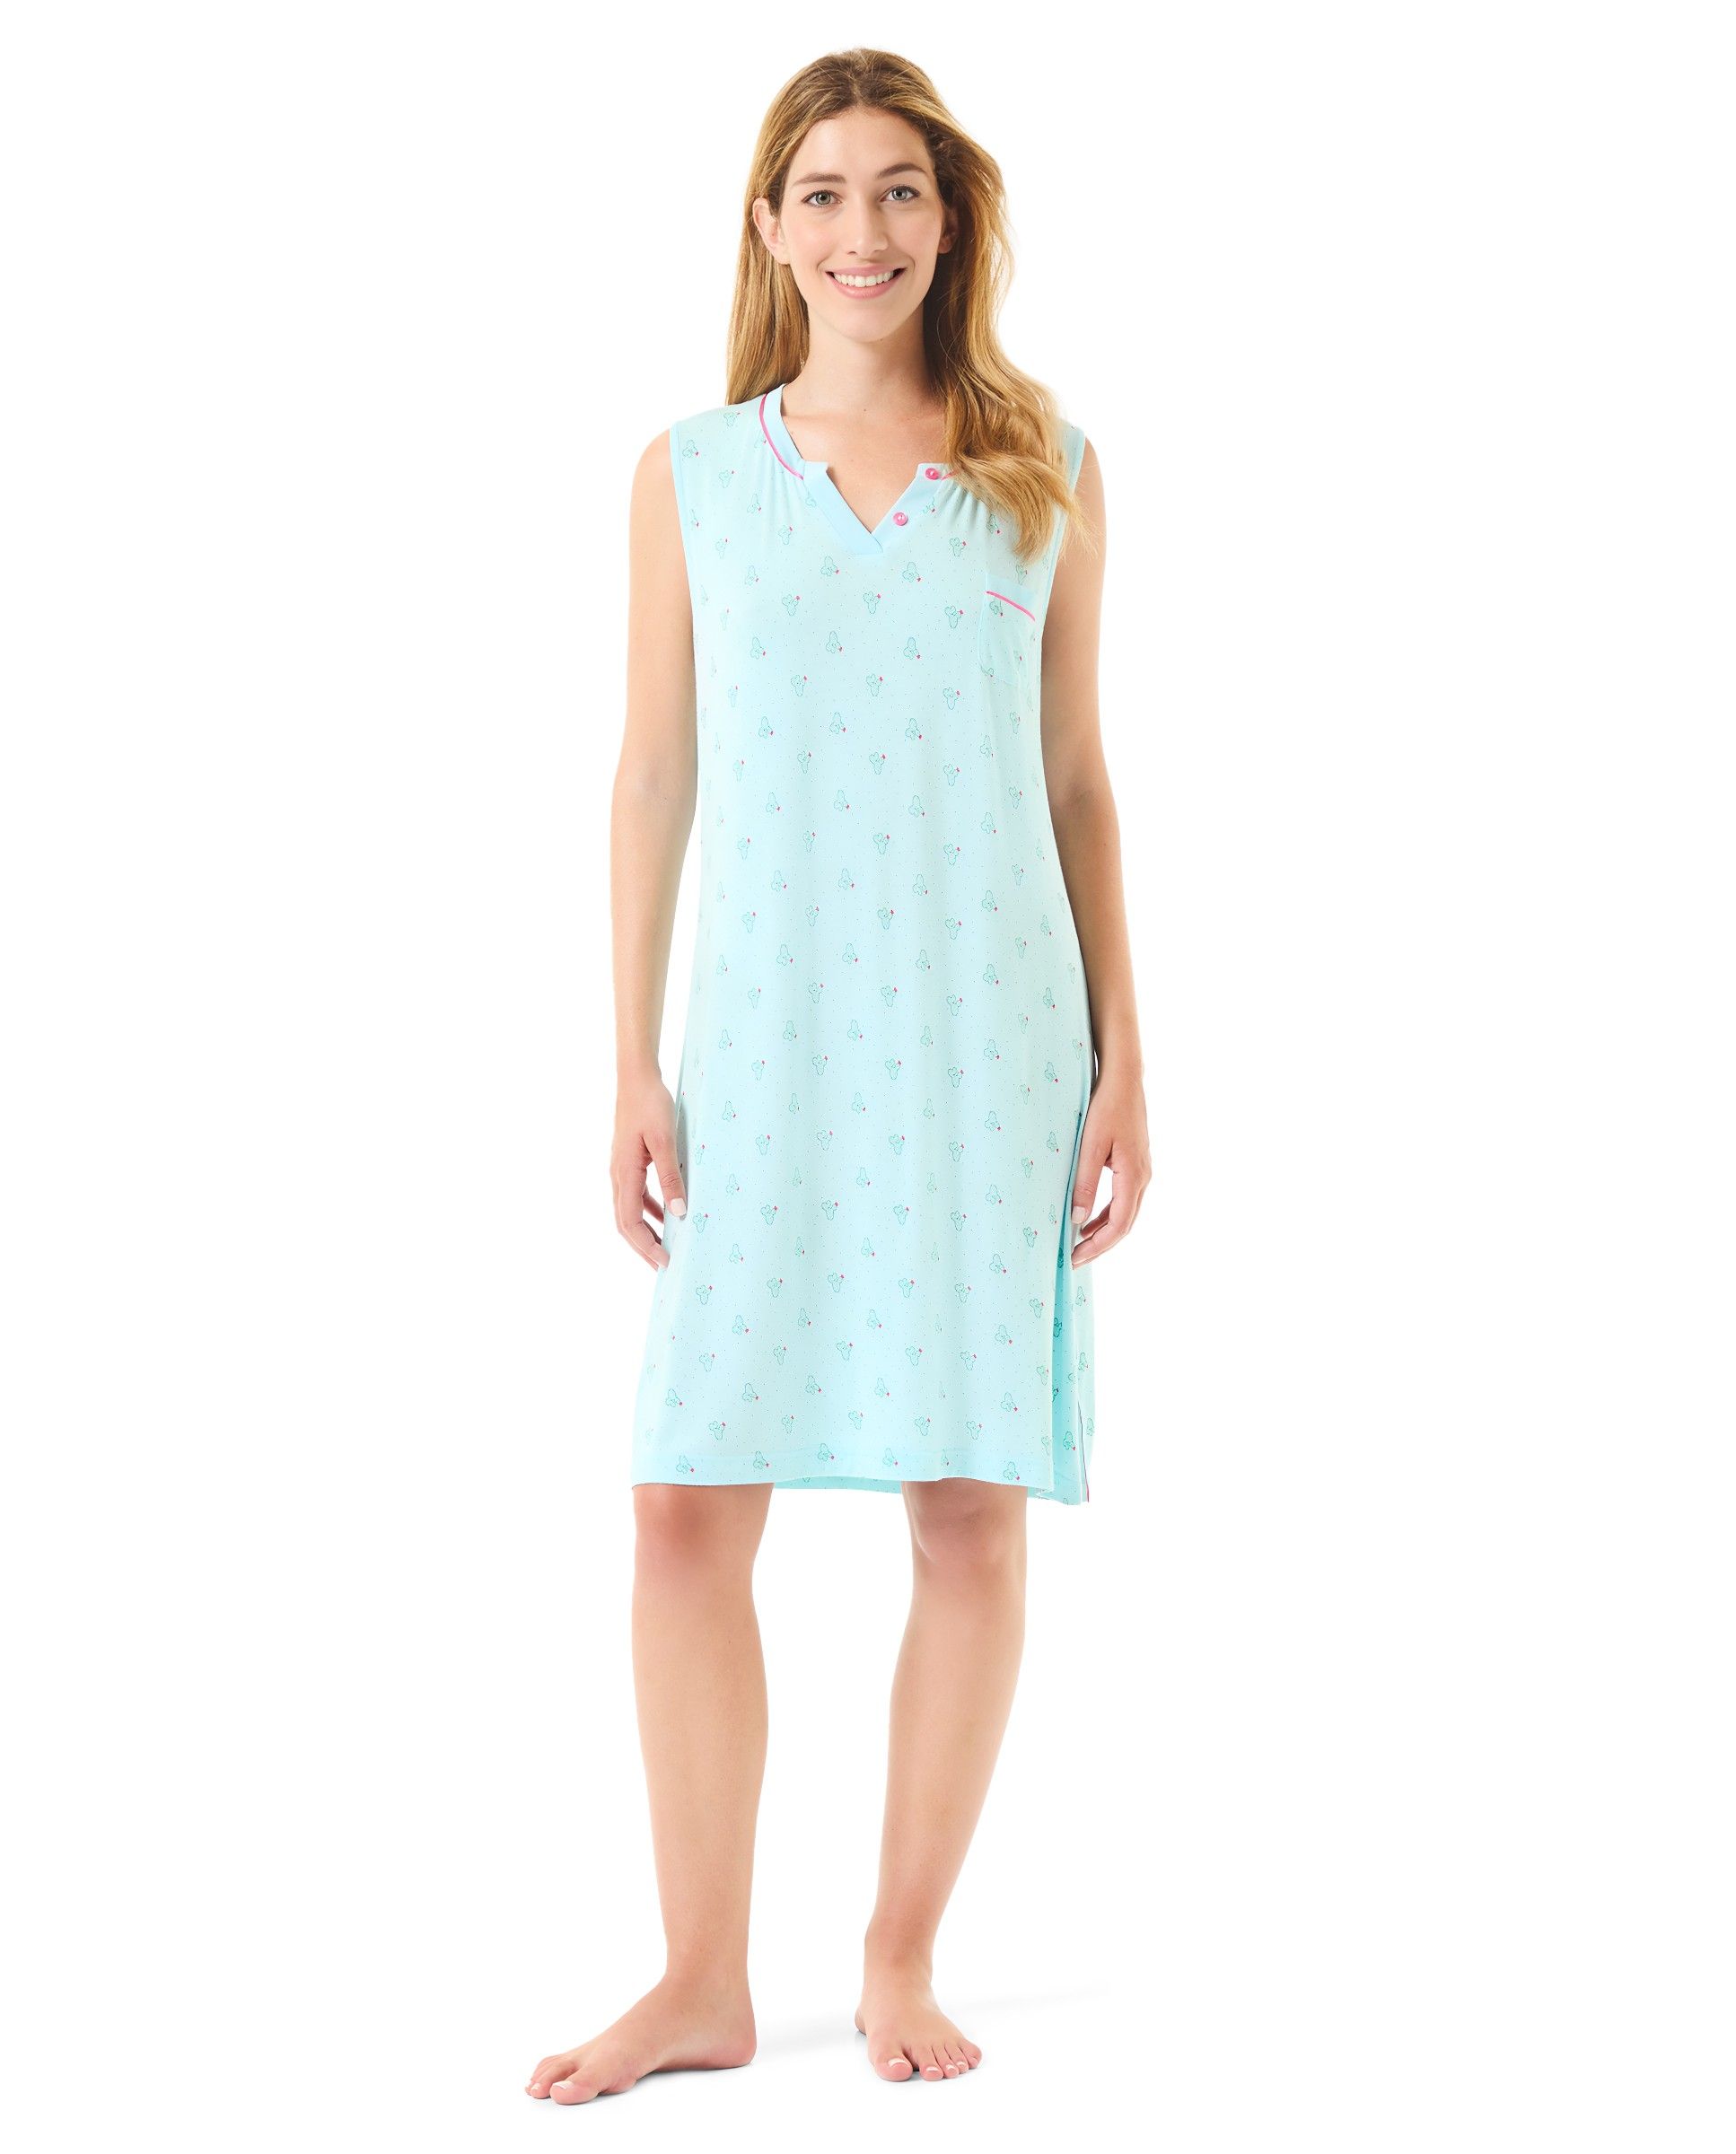 Woman in short summer nightgown with cactus print